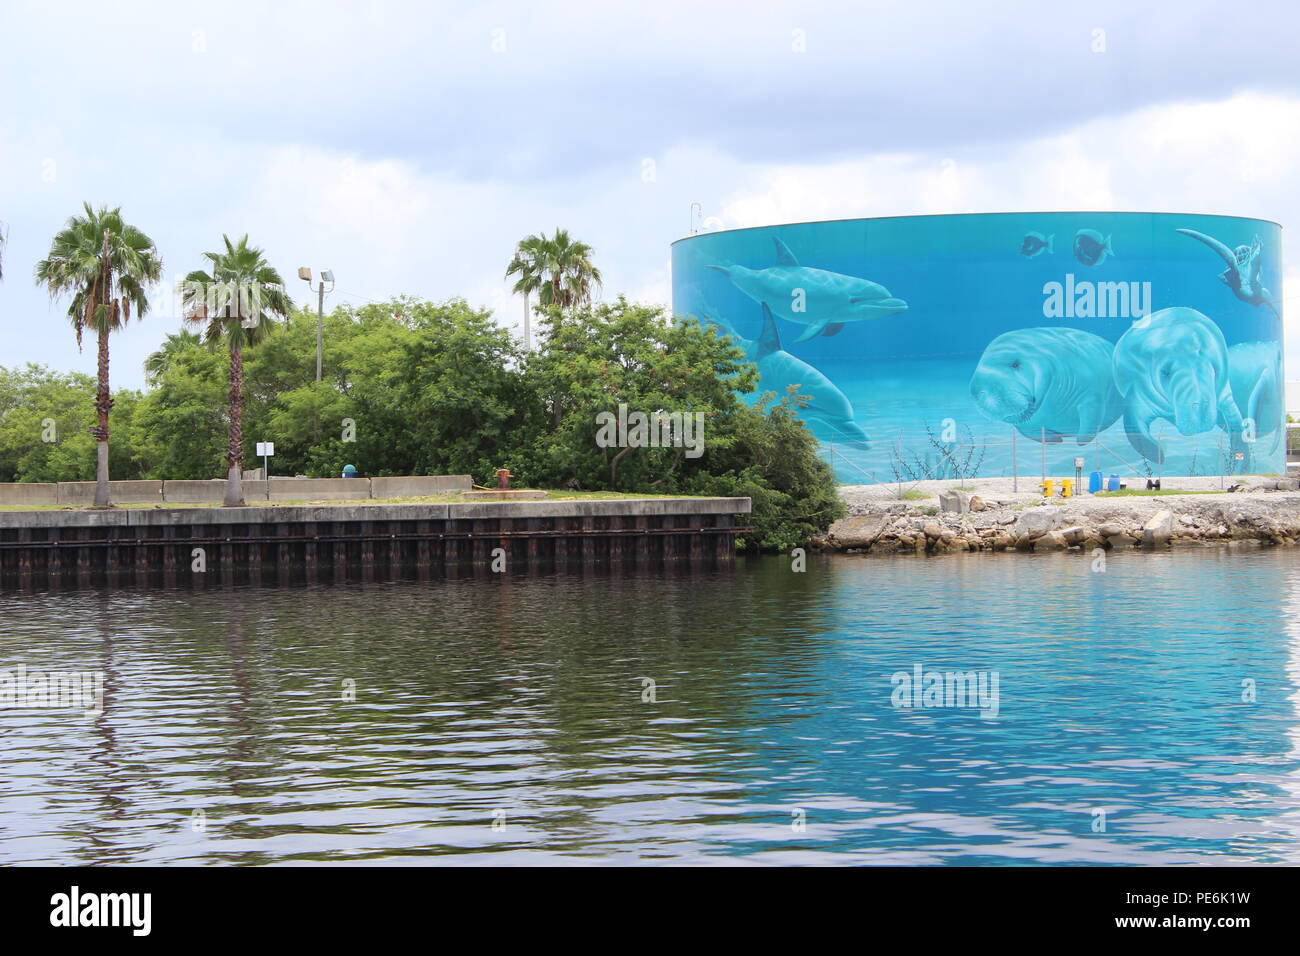 Mural painted on an oil storage tank at Port of Tampa, Florida, USA Stock Photo